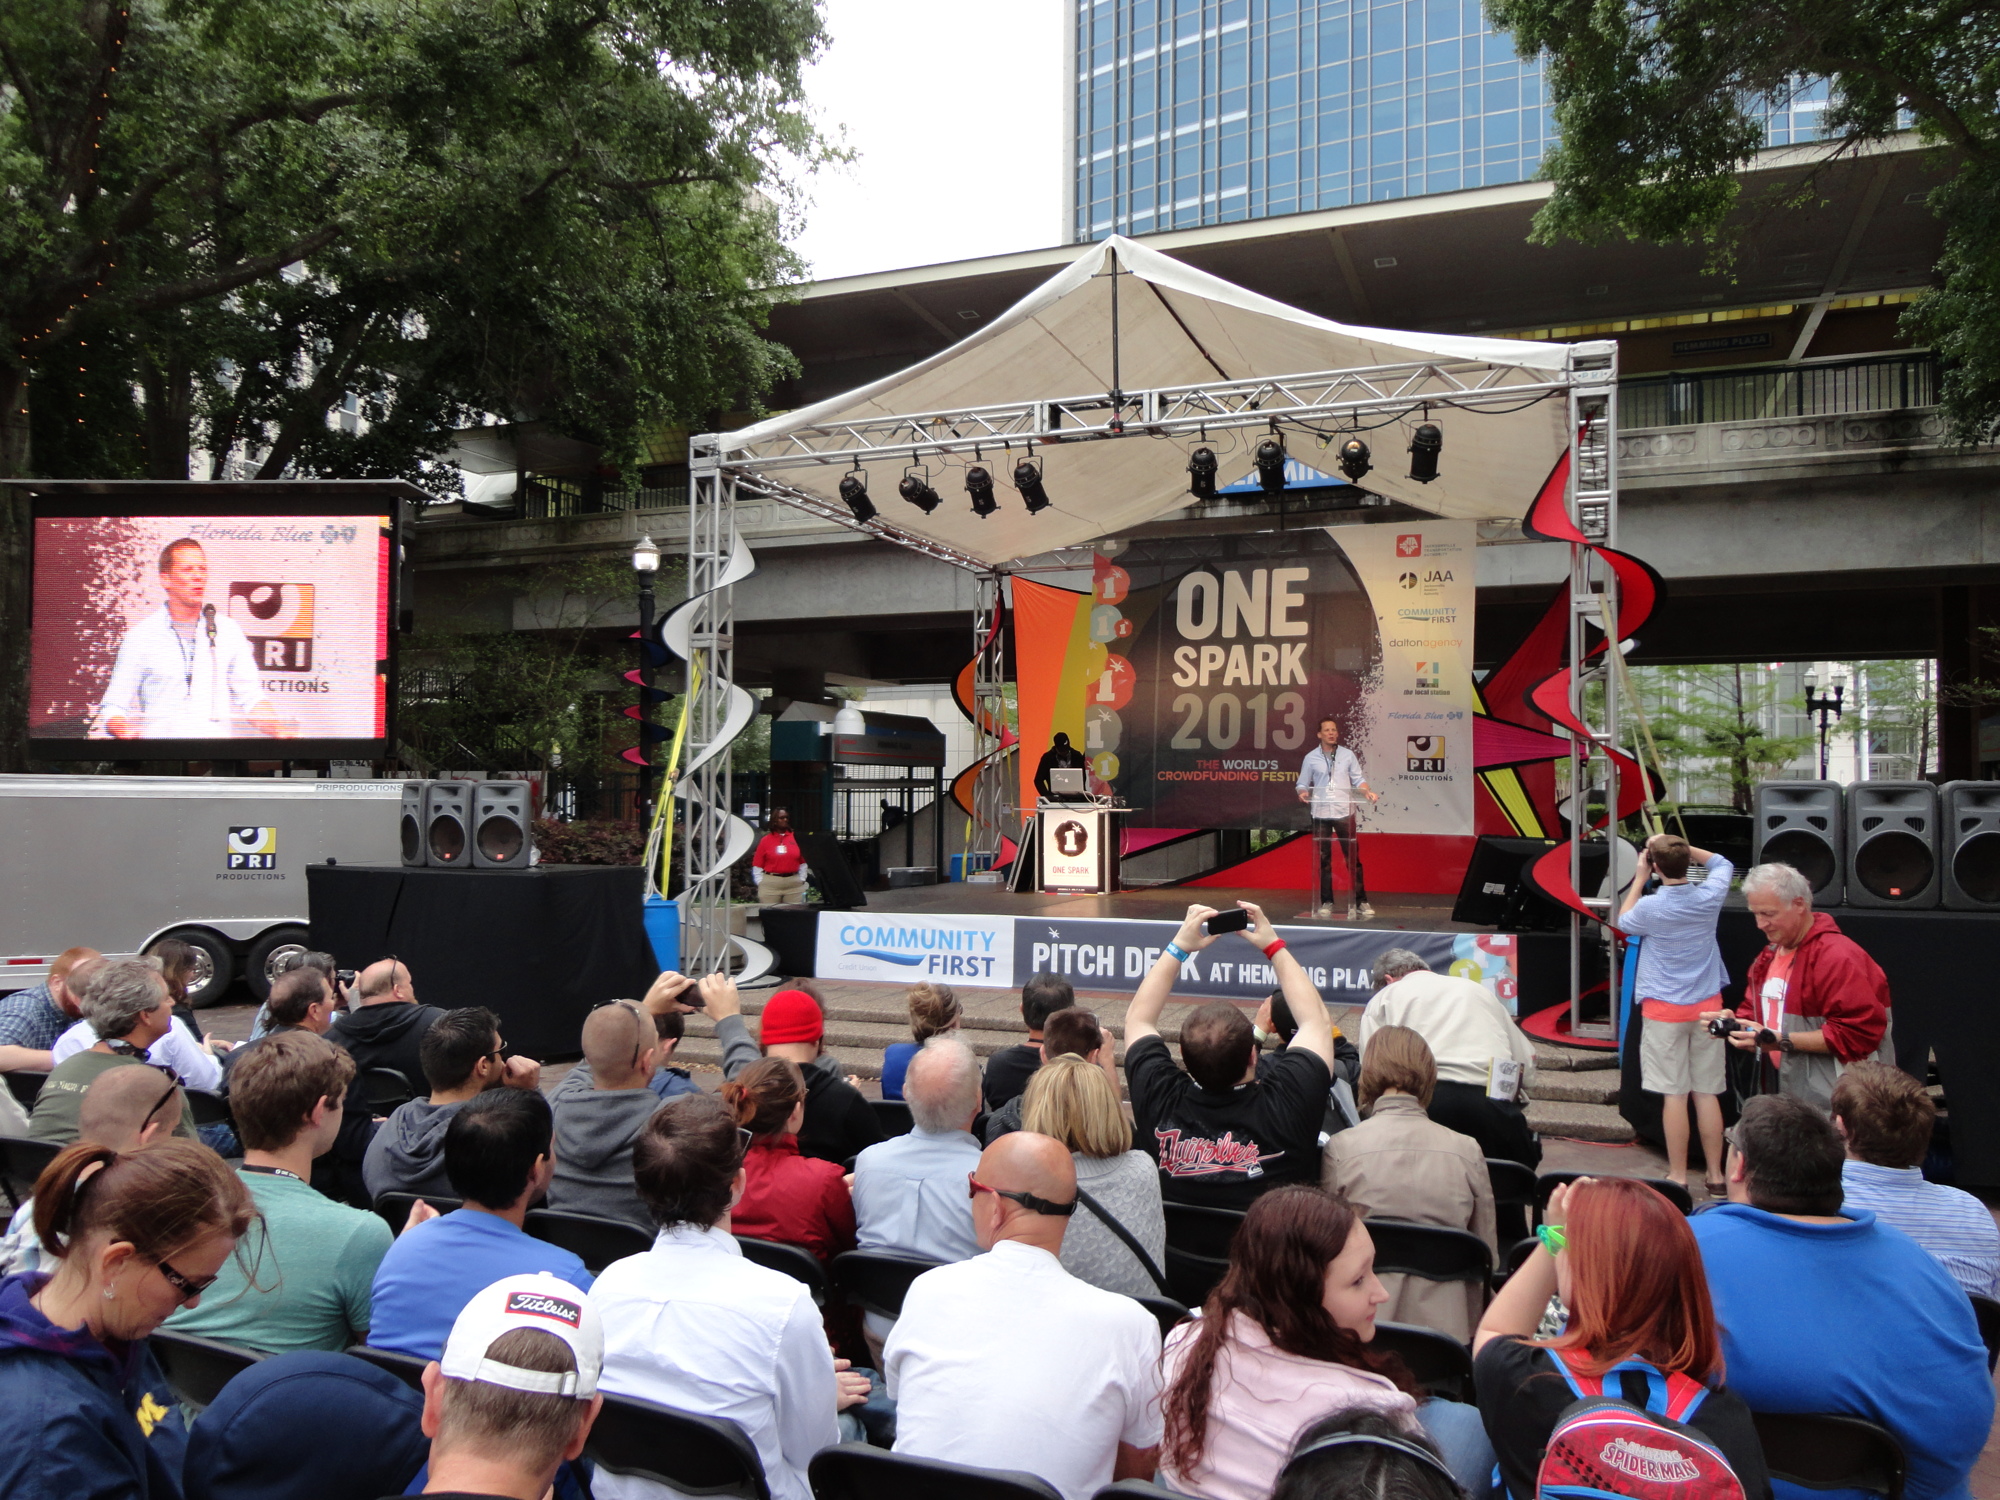 One Spark began in 2013 with a five-day crowdfunding festival Downtown.